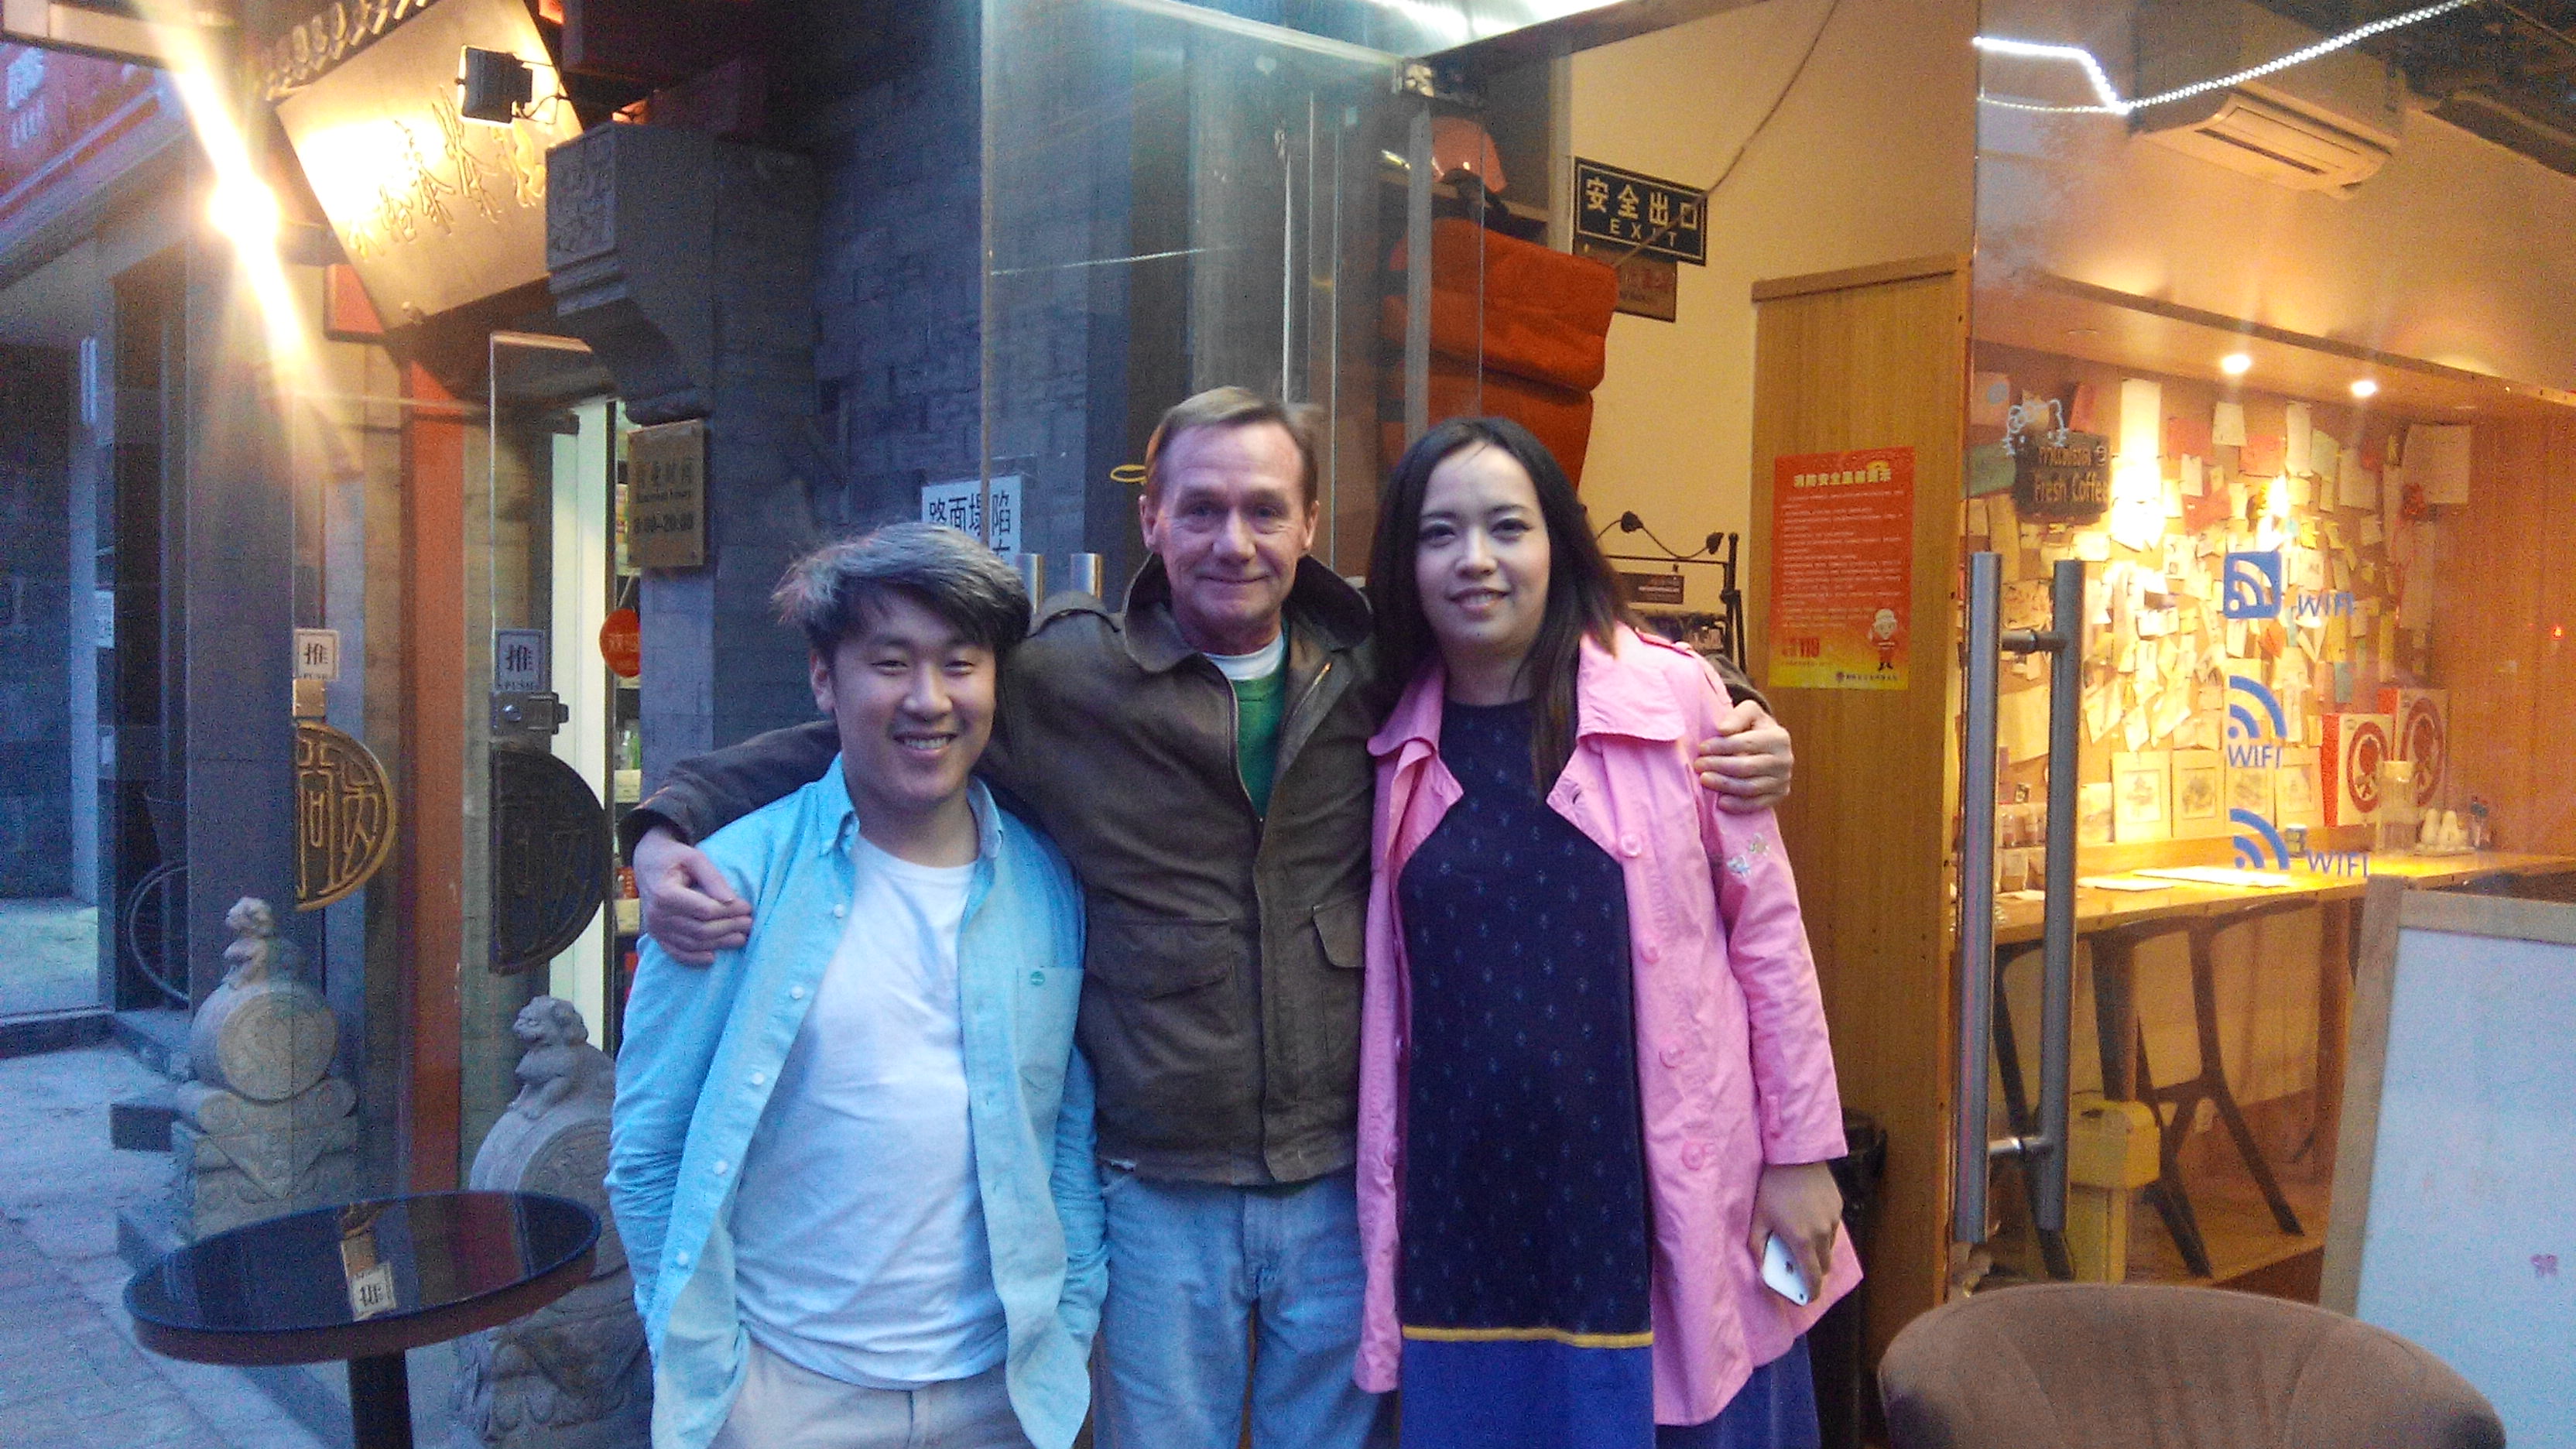 Denis with Lisa and Ethan in front of Tomato cafe in Beijing.